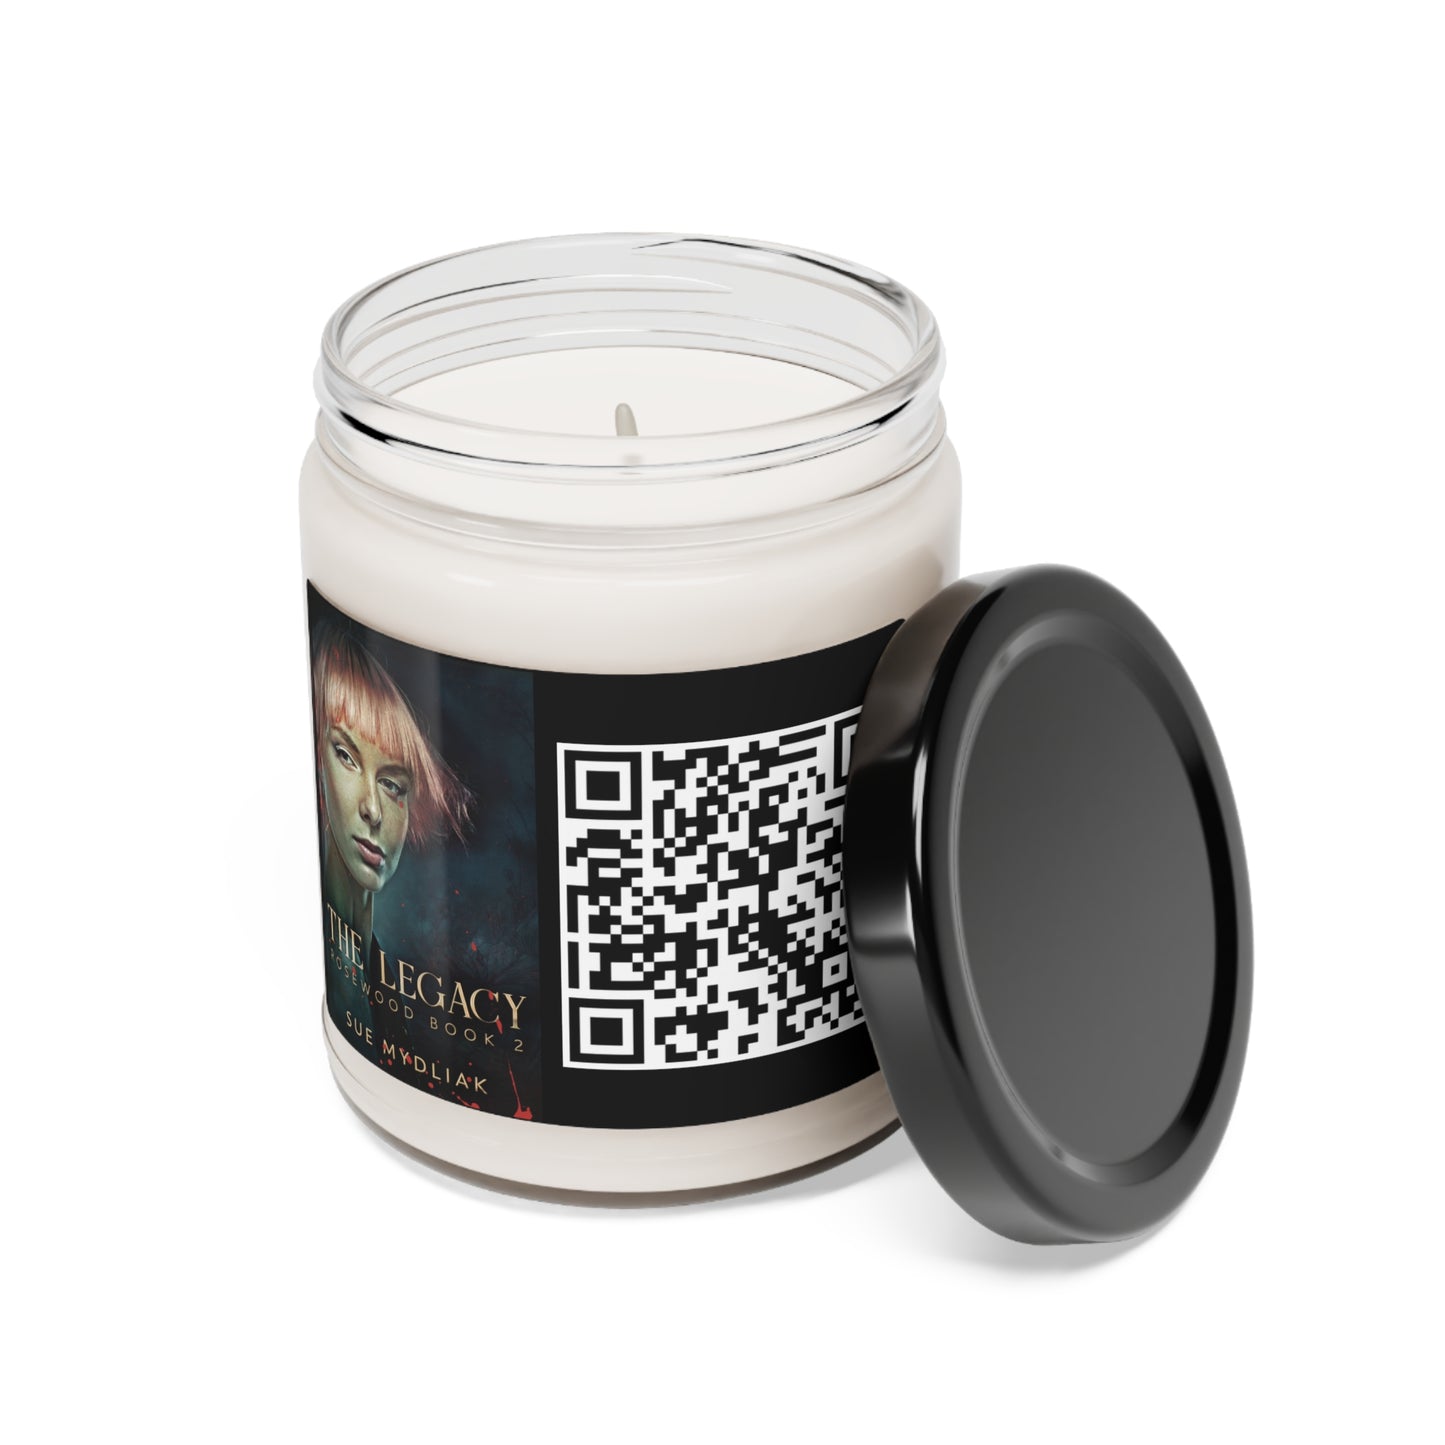 The Legacy - Scented Soy Candle